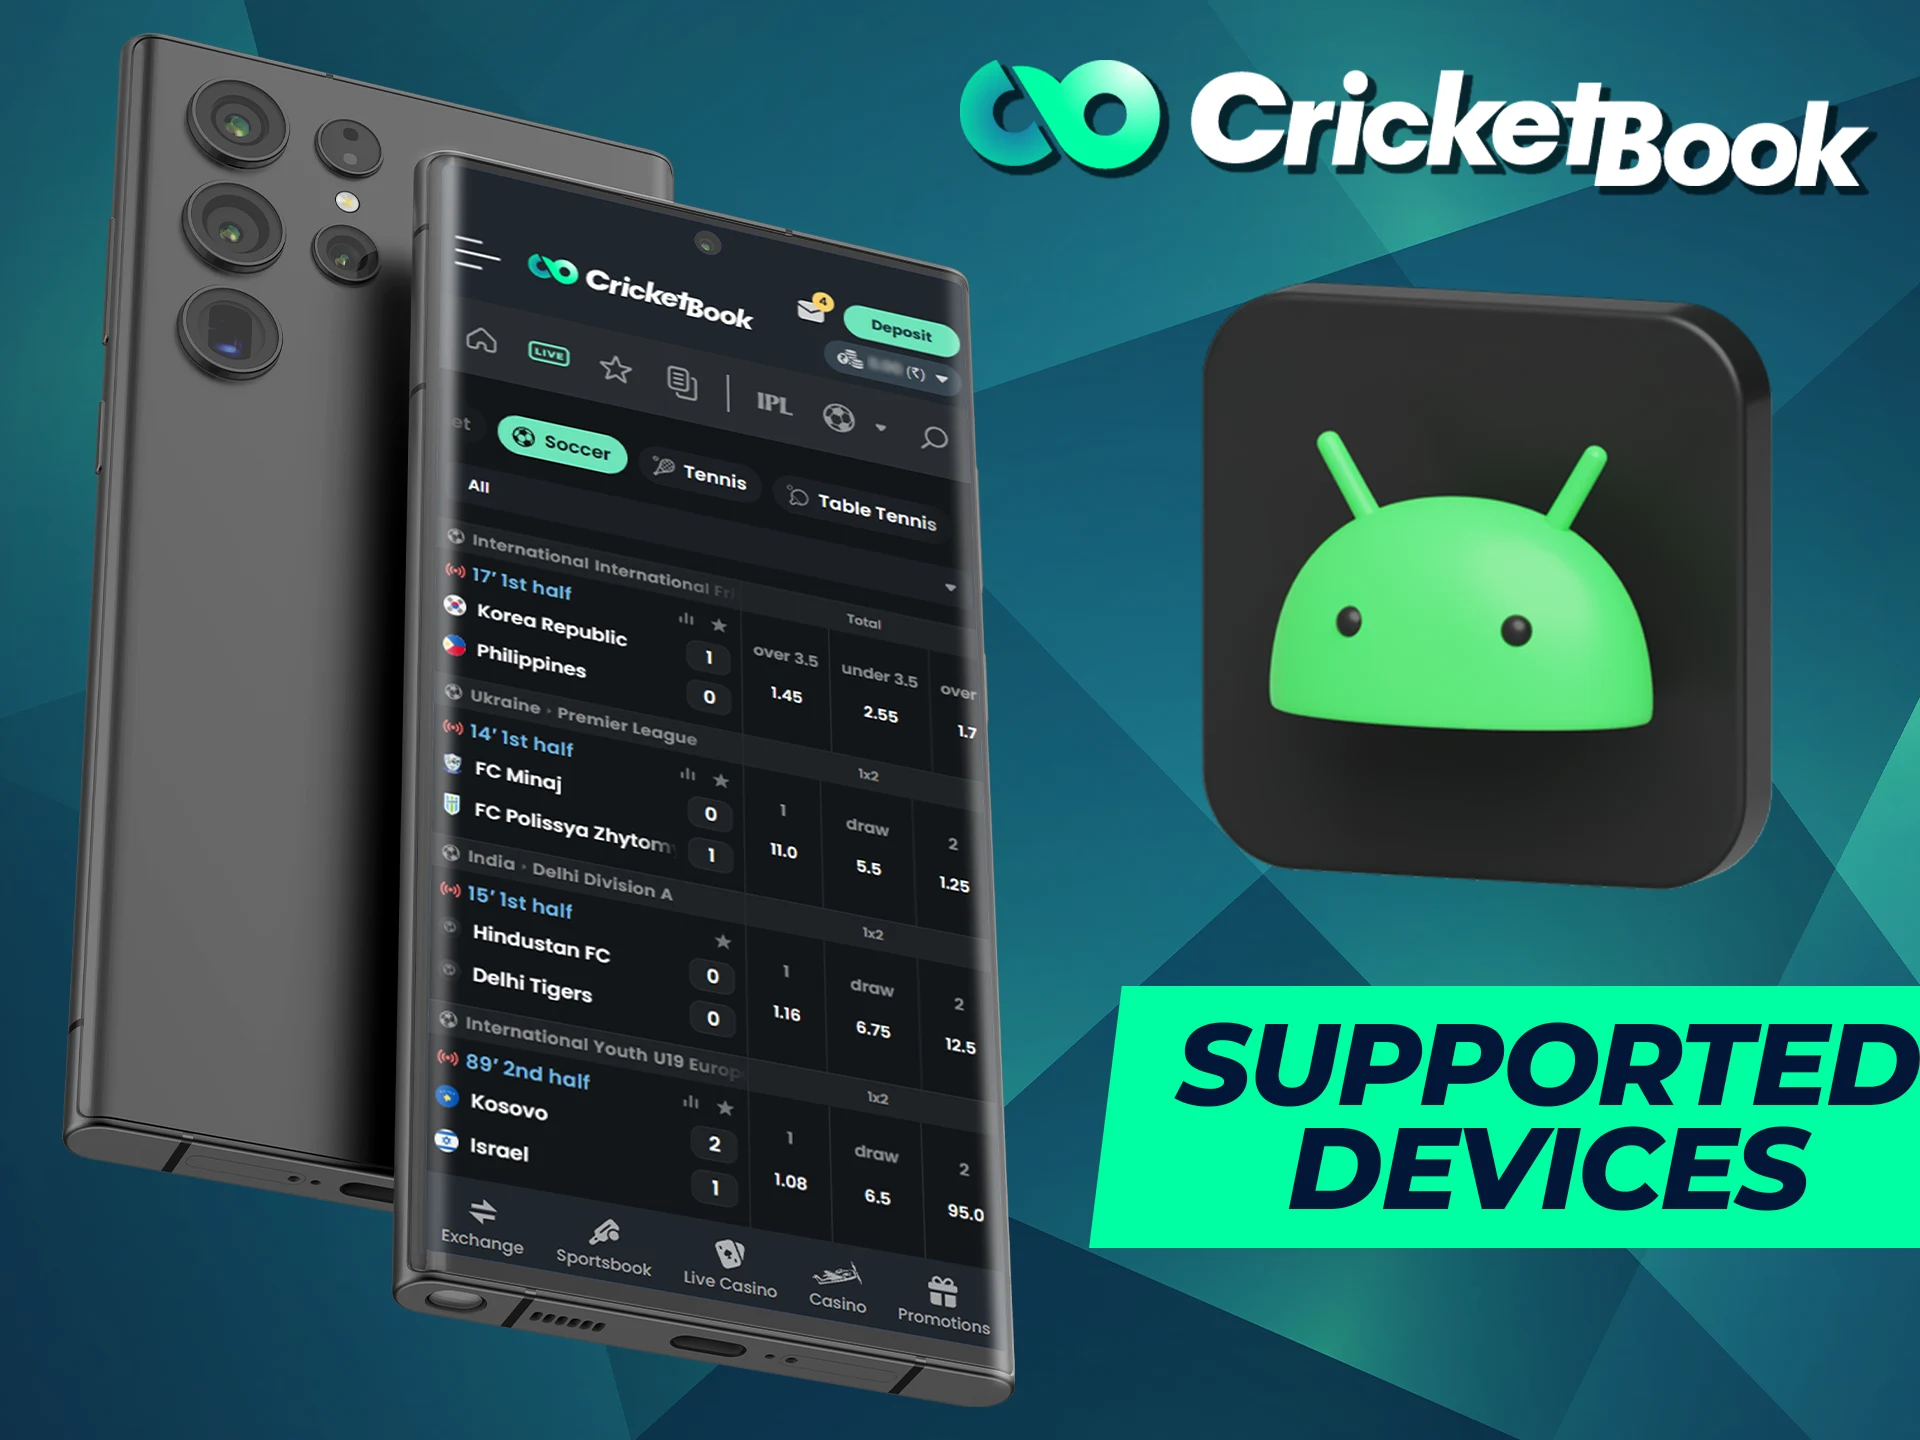 The CricketBook app is supported on a variety of Android gadgets.